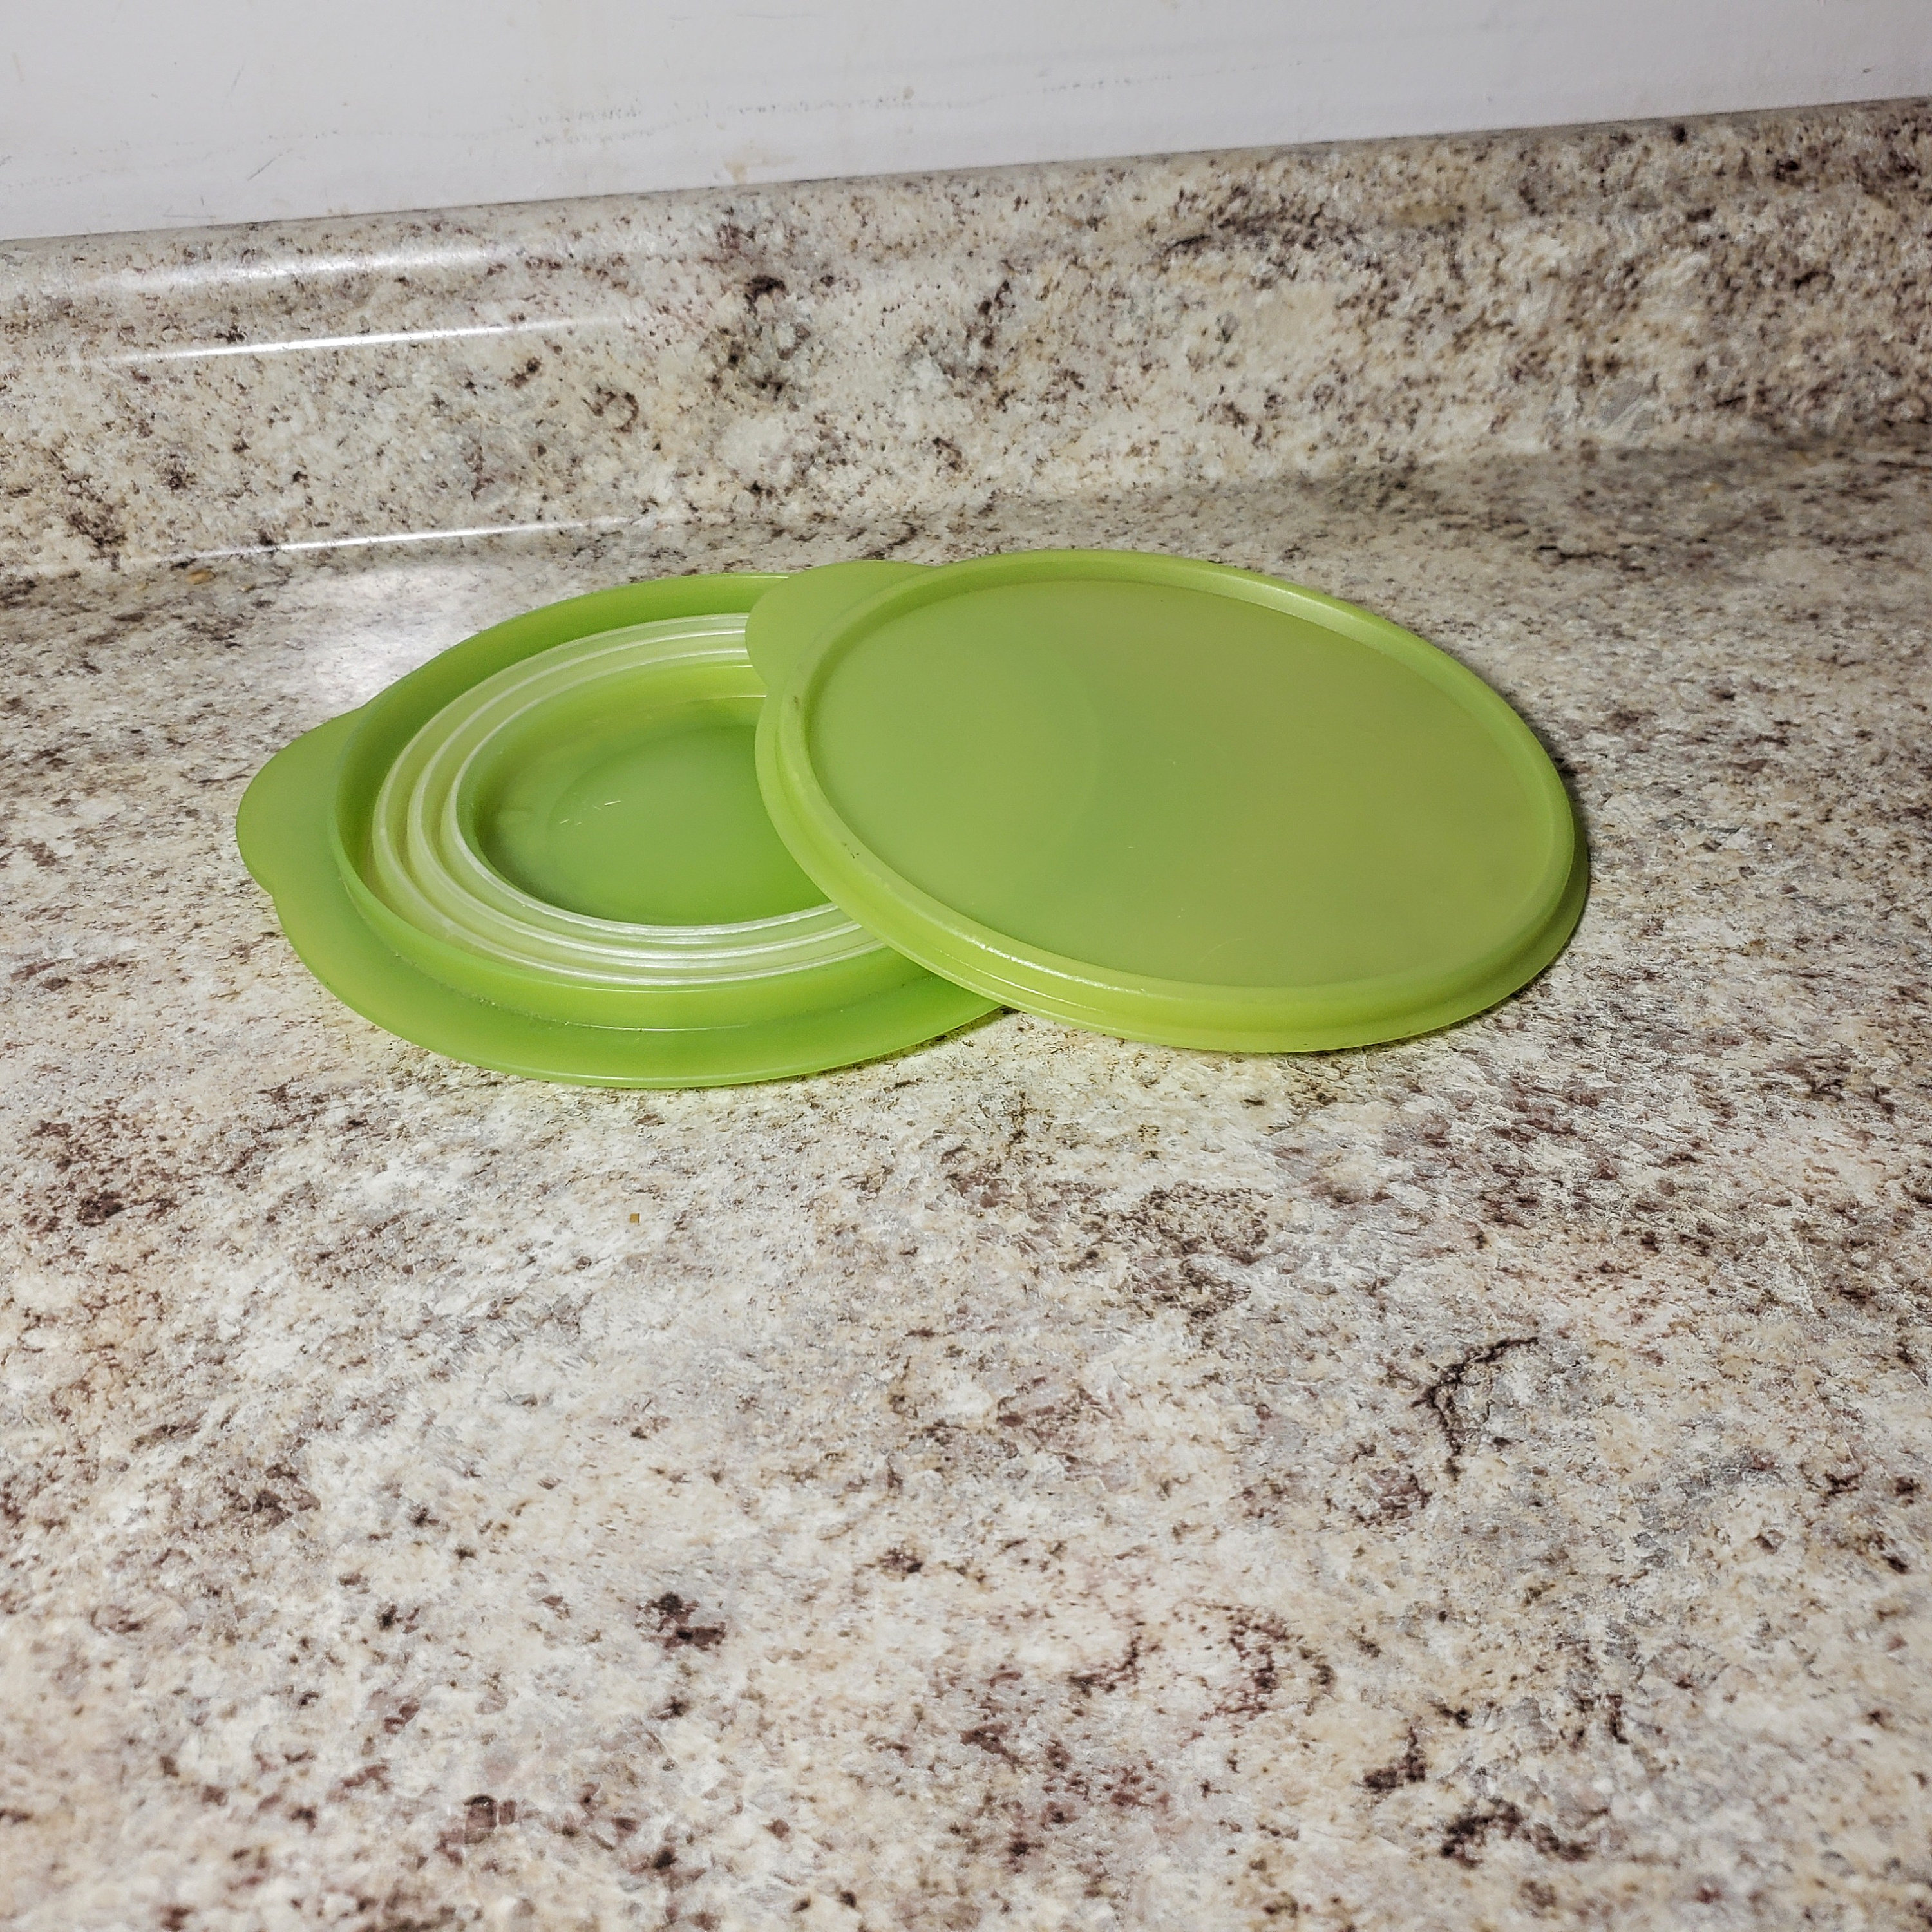 Tupperware set of 2 Flat Out Collapsible Bowls with lids 950ml and 700ml,  Used